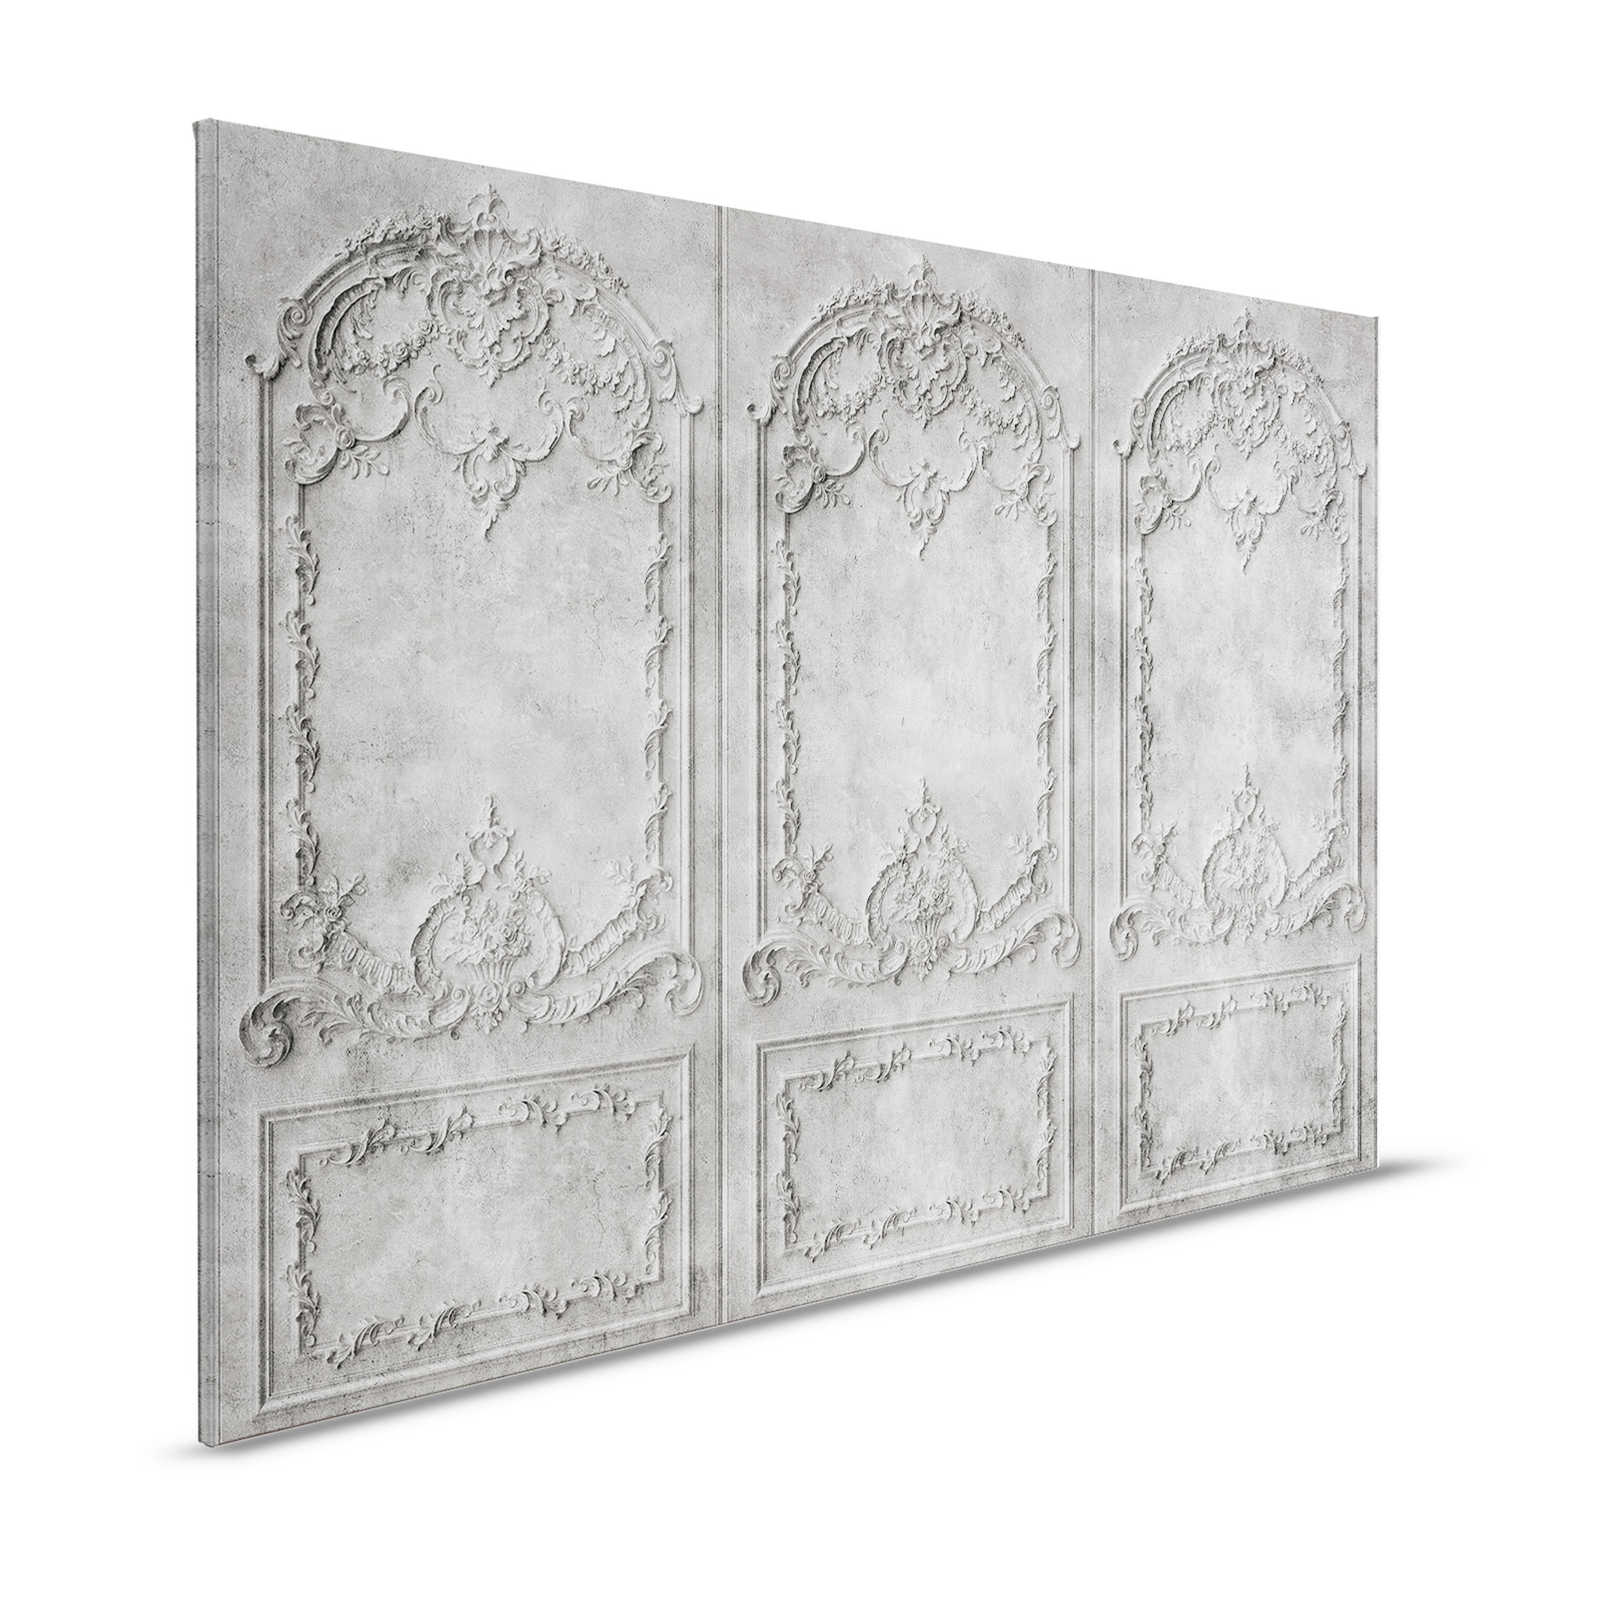 Versailles 2 - Canvas painting Wooden panels Grey in Baroque style - 1.20 m x 0.80 m
